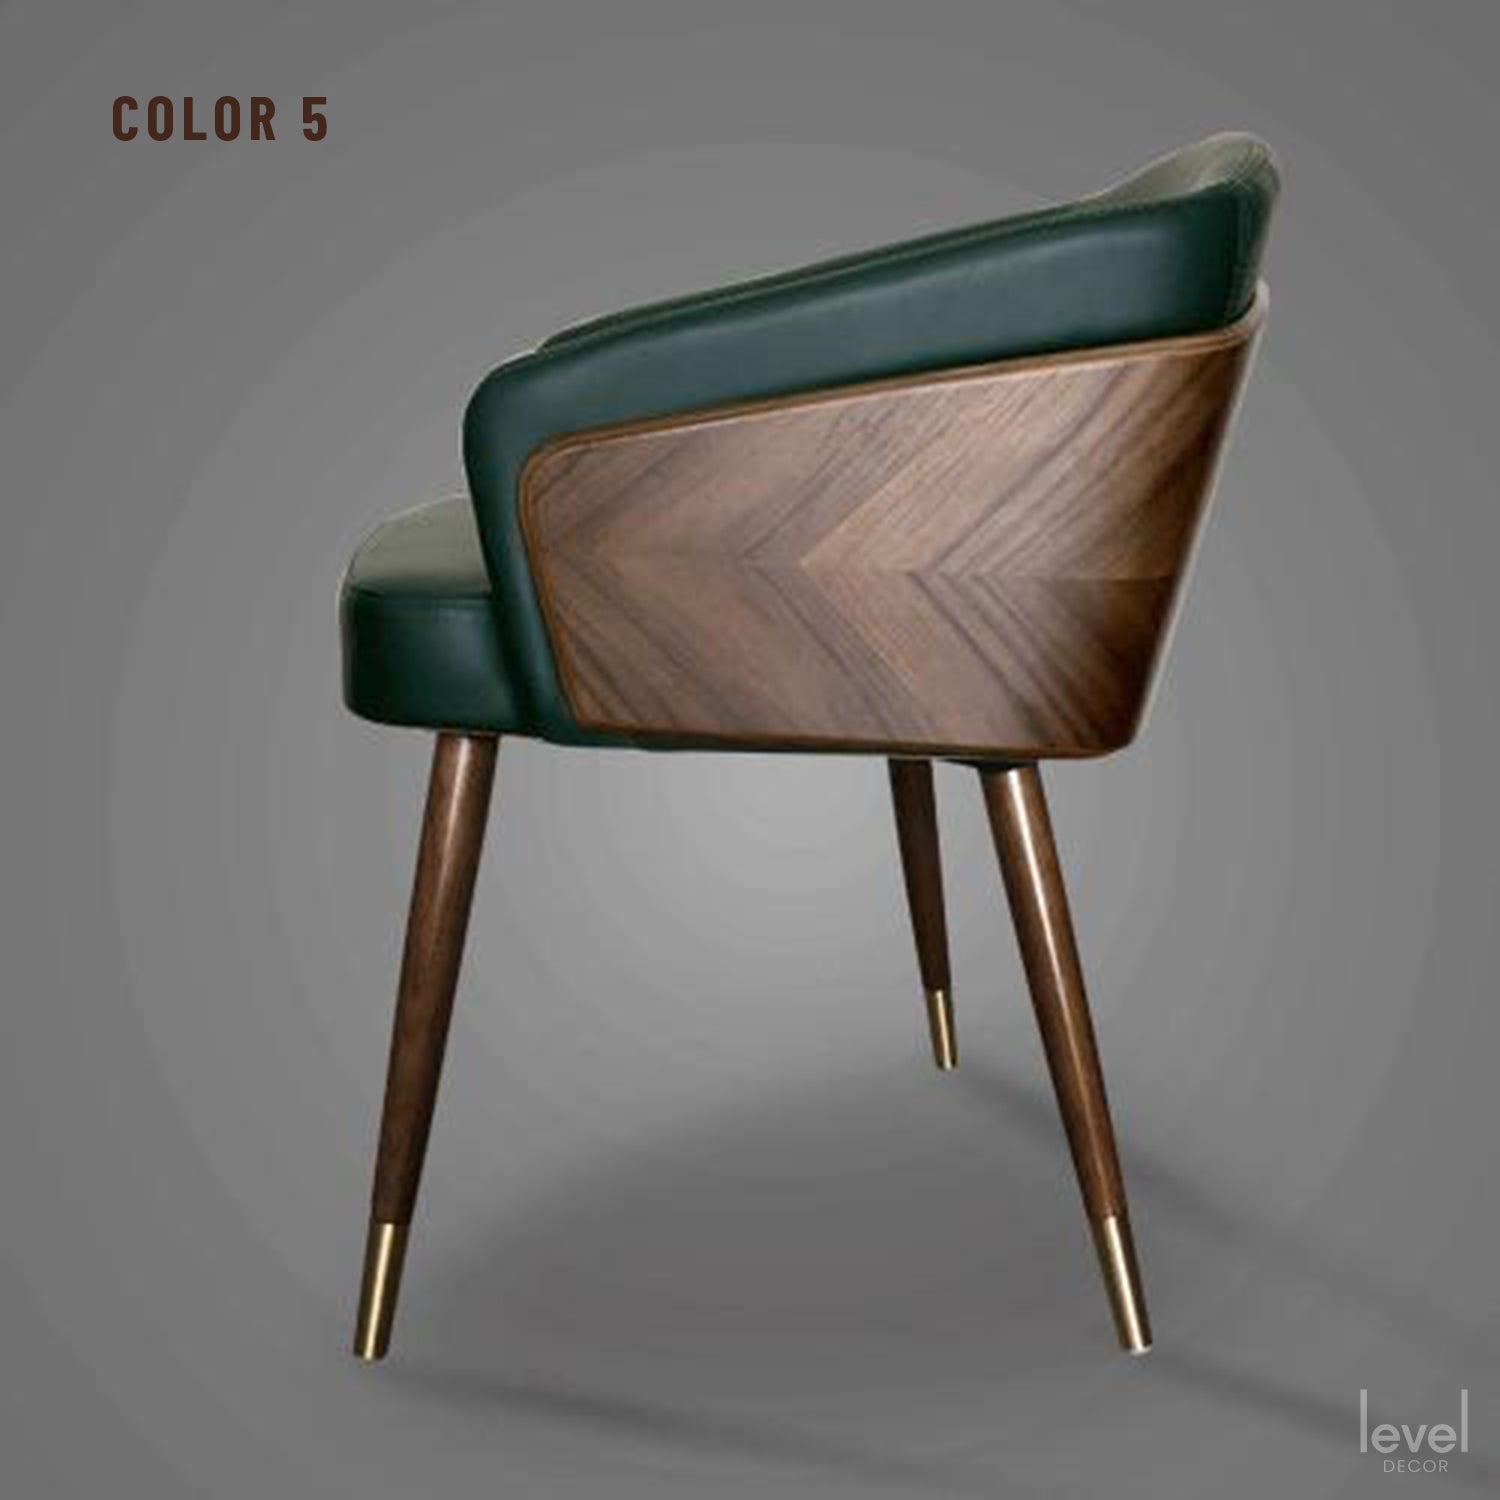 Modern Solid Wood Leisure Chairs - Color 5 - Level Decor